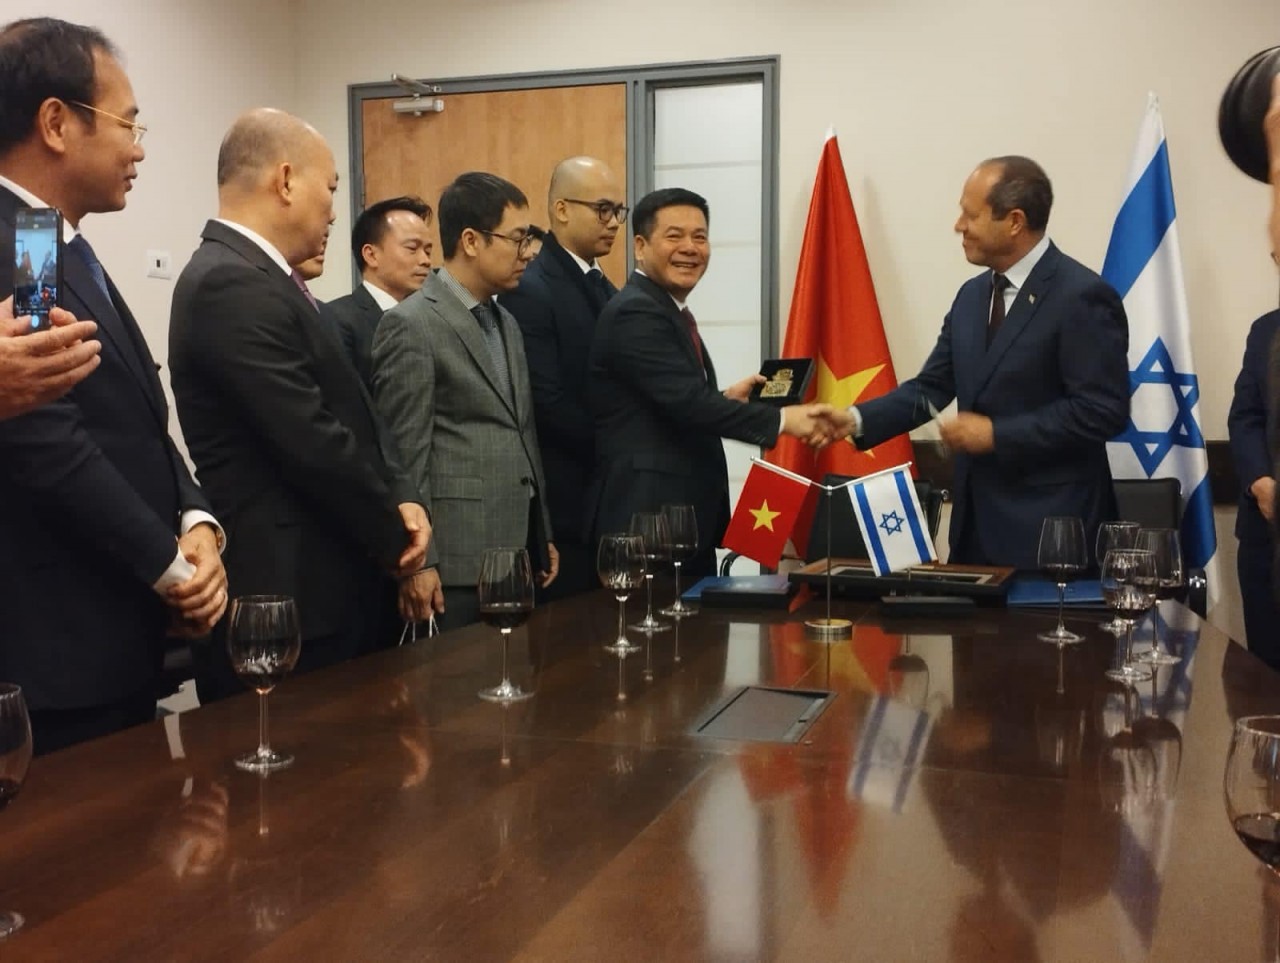 At a working session between Vietnamese Minister of Industry and Trade Nguyen Hong Dien and Israeli Minister of Economy and Industry Nir Barkat in Israel. Photo: Israel's Economic & Trade Mission in Vietnam